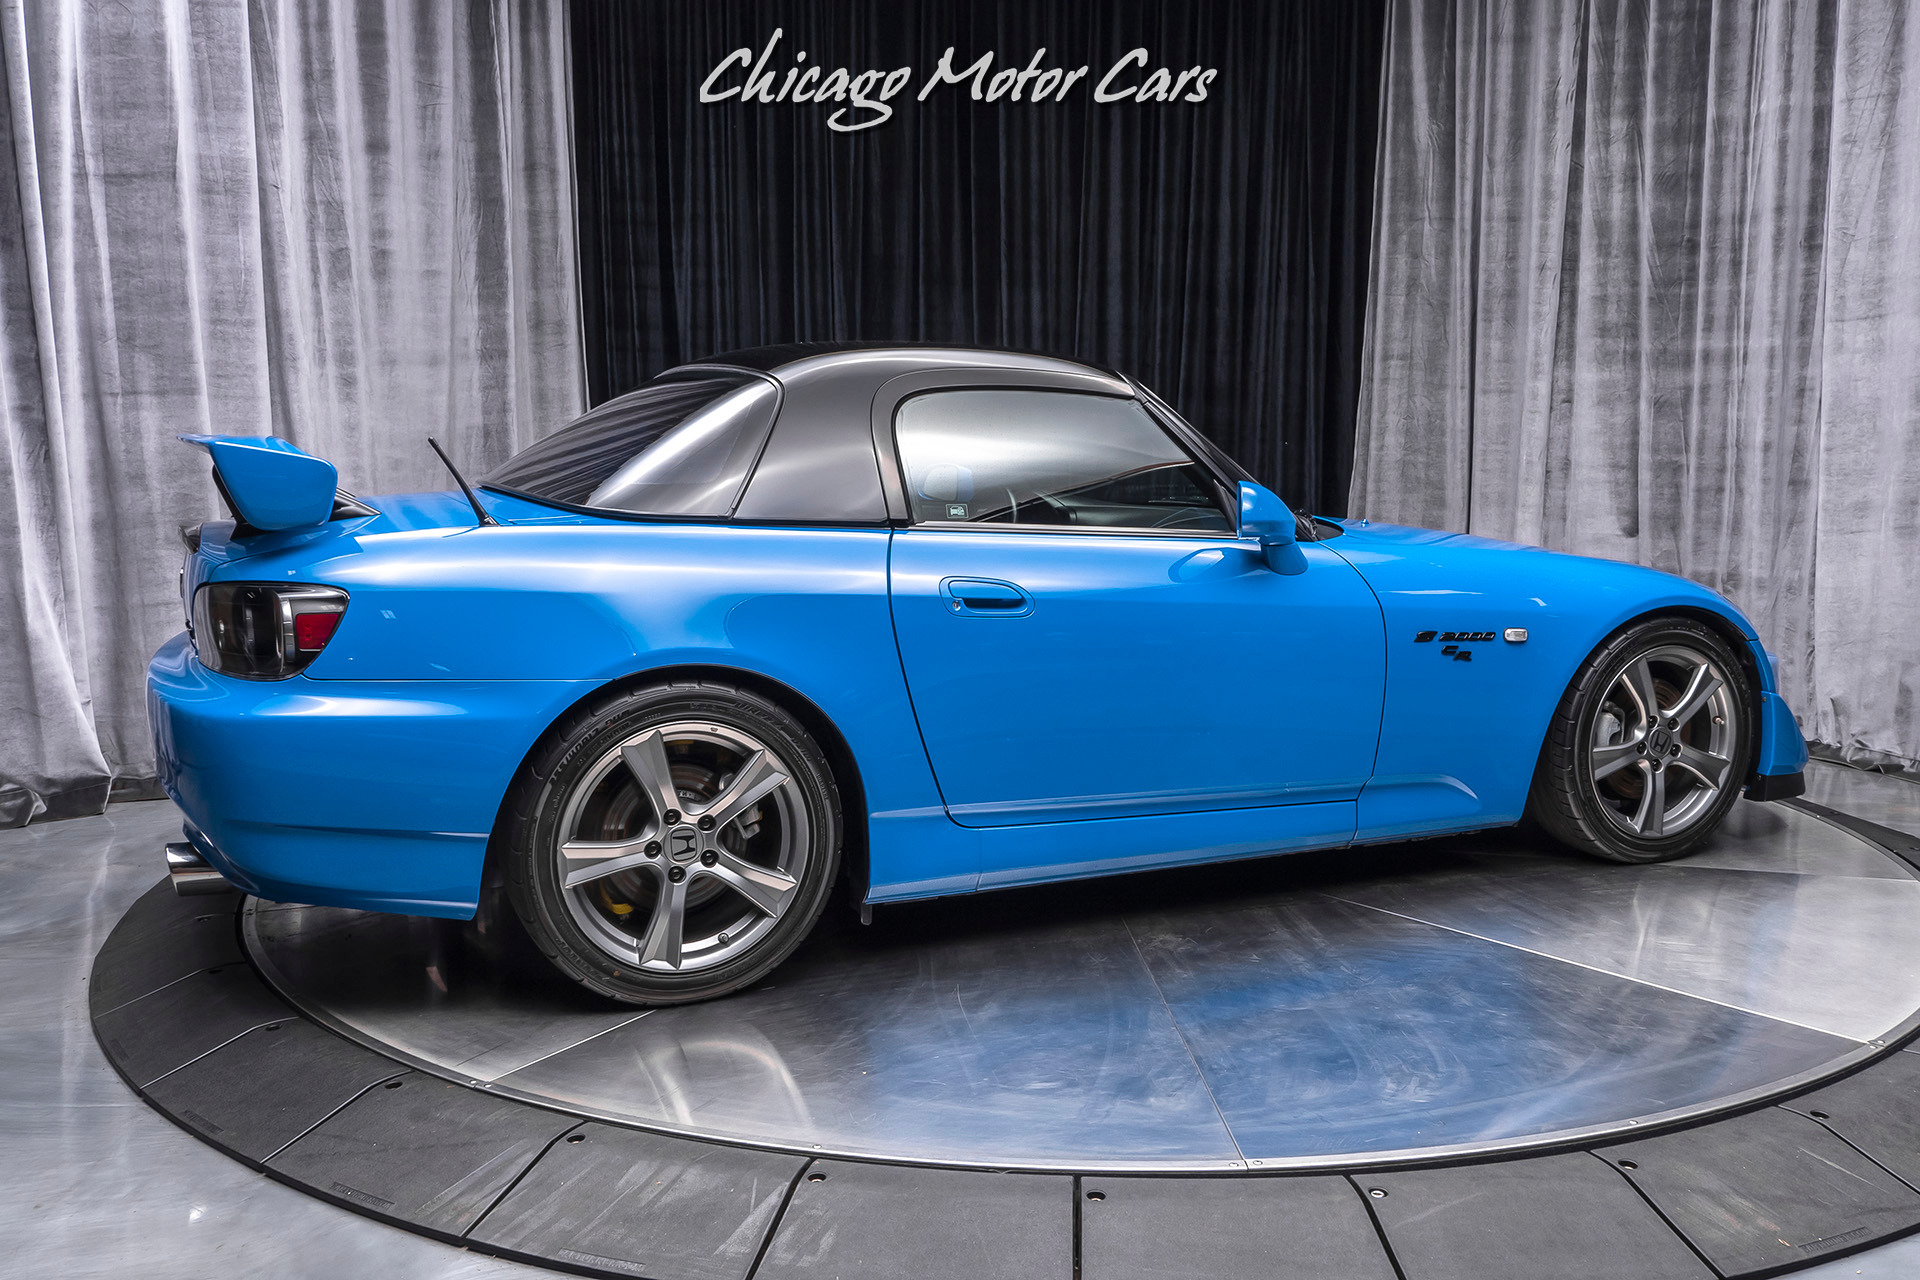 Used 2008 Honda S2000 Cr 1 Of 200 In Apex Blue Pearl For Sale Special